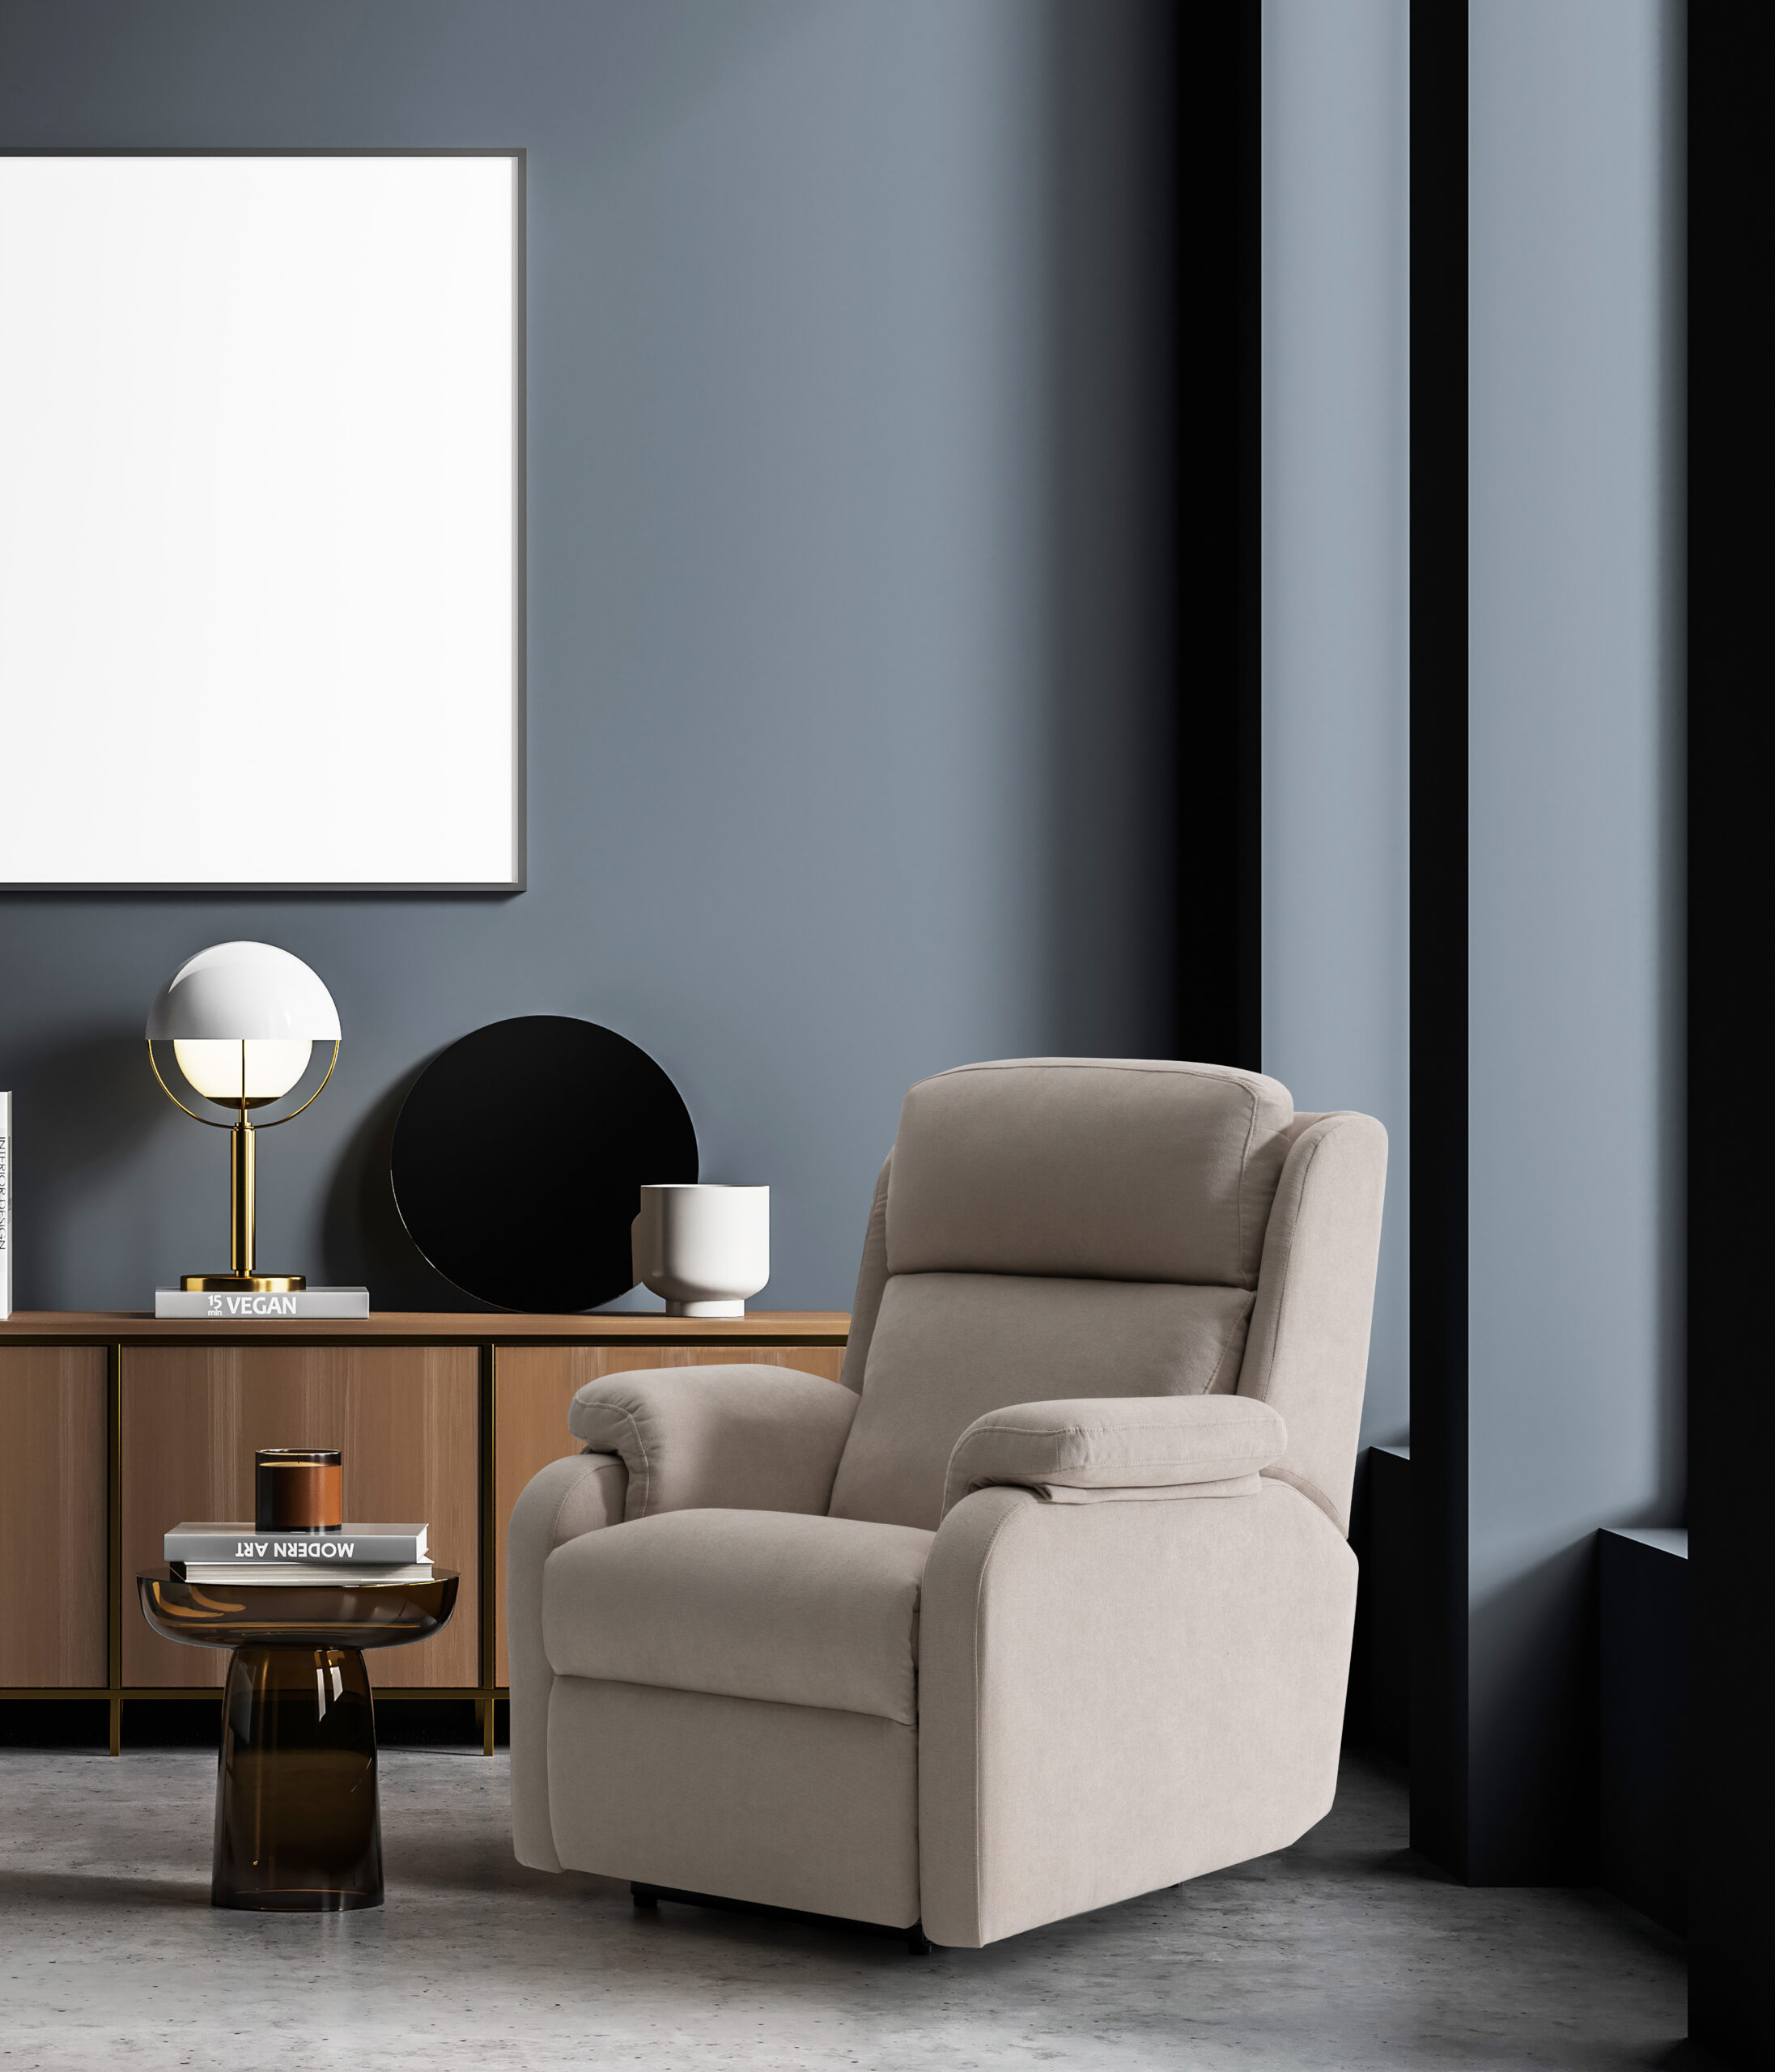 Empty poster on grey wall in the waiting room interior with glass coffee table and two green armchairs. Lamp on the left and on the sideboard. Two windows on the right. Concrete floor. 3d rendering